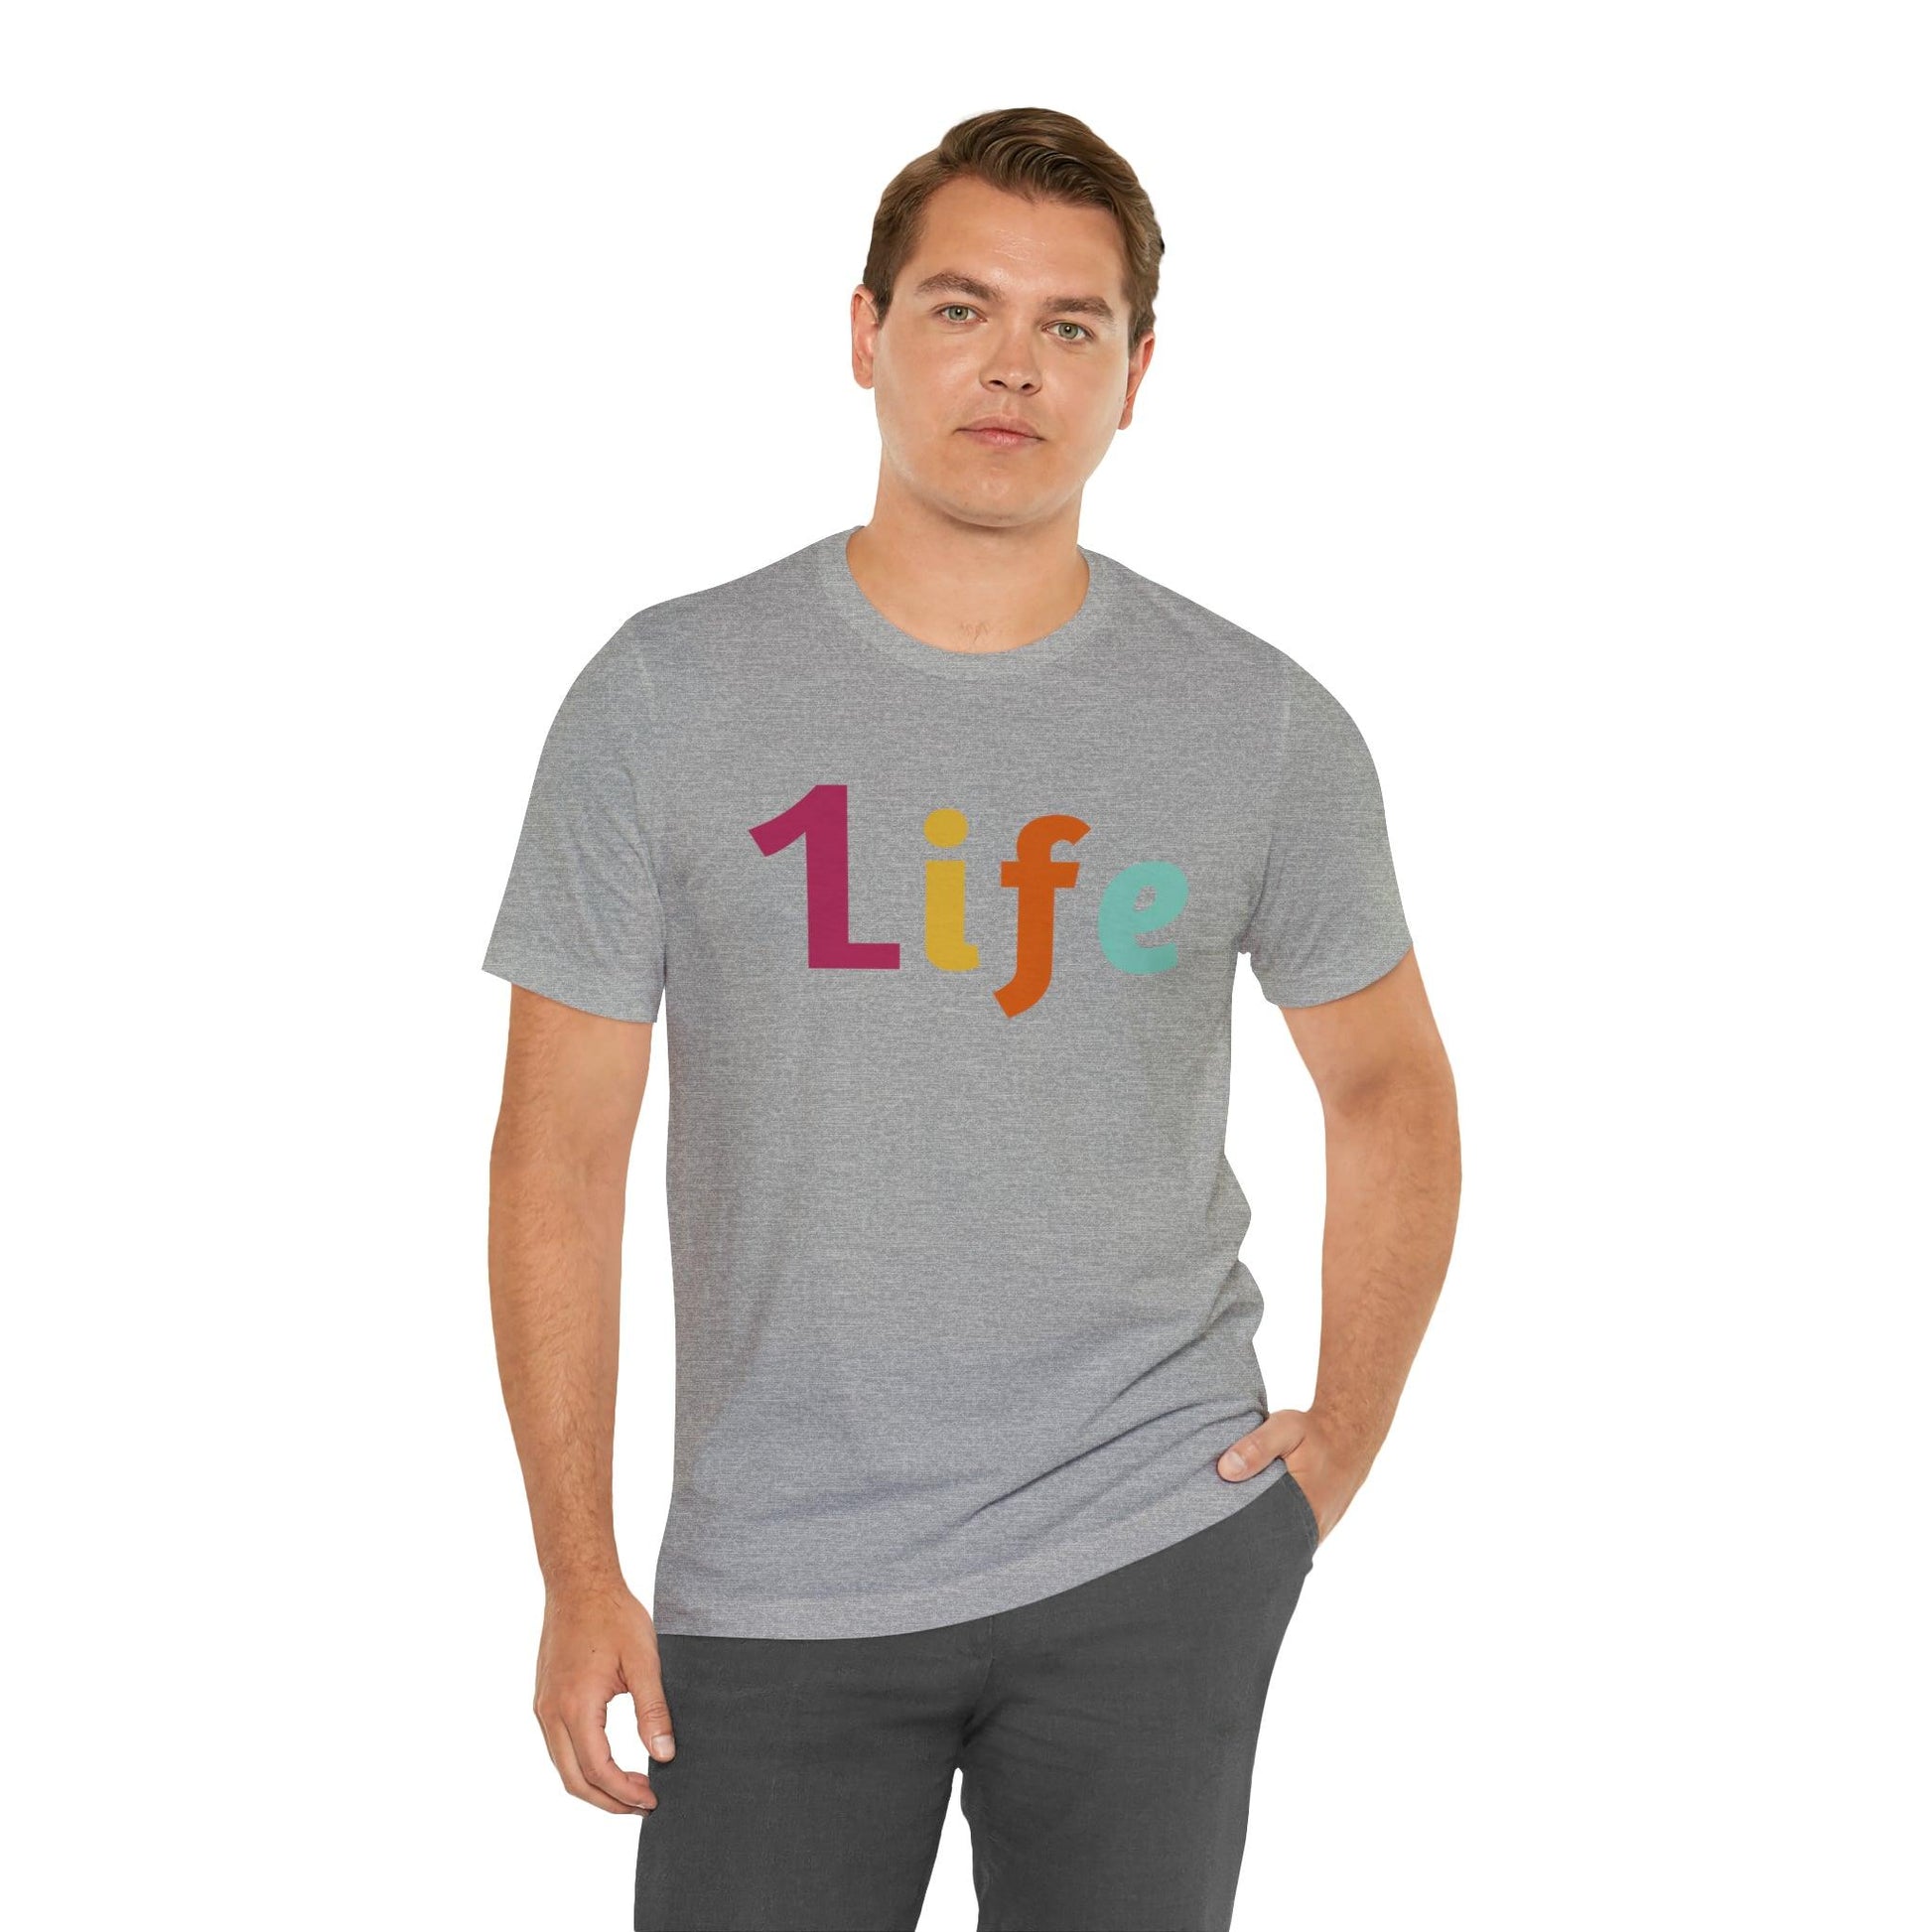 One life Shirt 1life shirt Live Your Life You Only Have One Life To Live Shirt - Giftsmojo